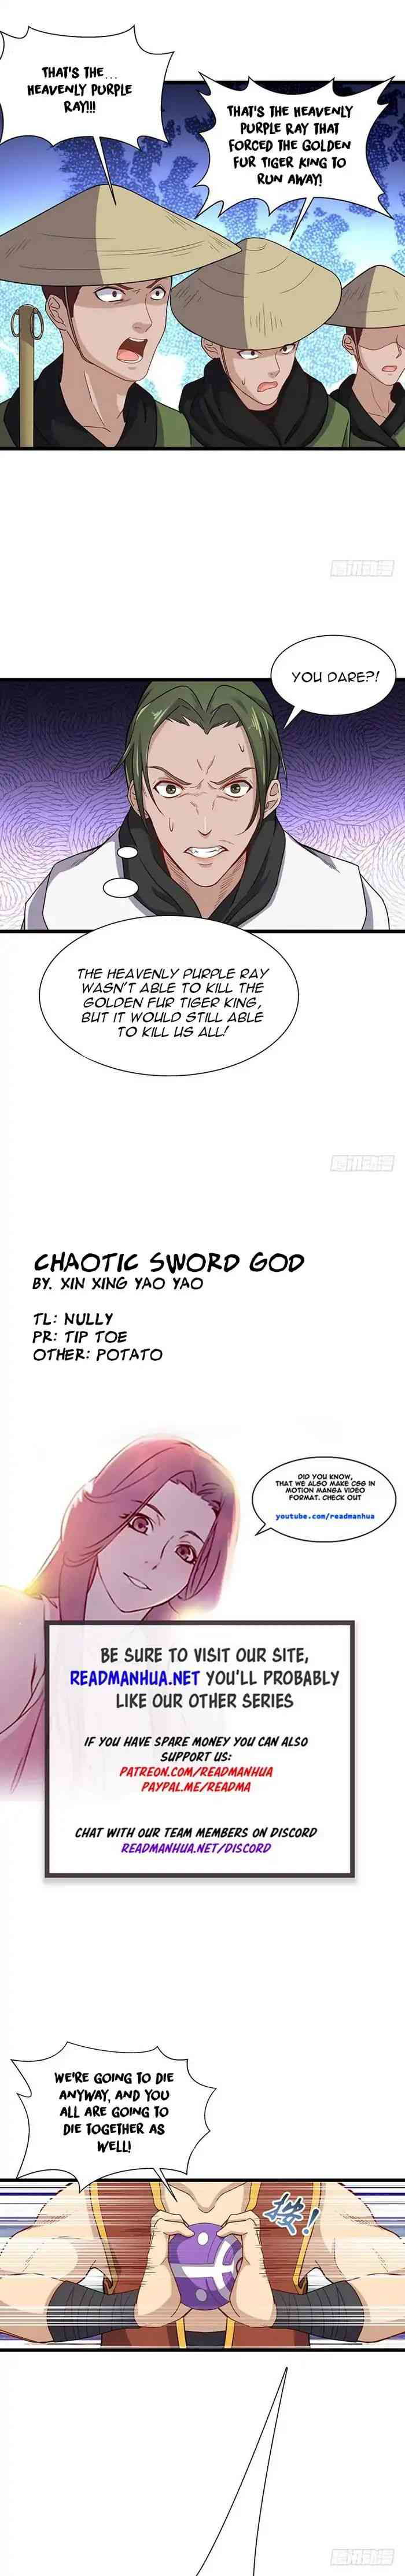 Chaotic Sword God Chapter 60 page 2